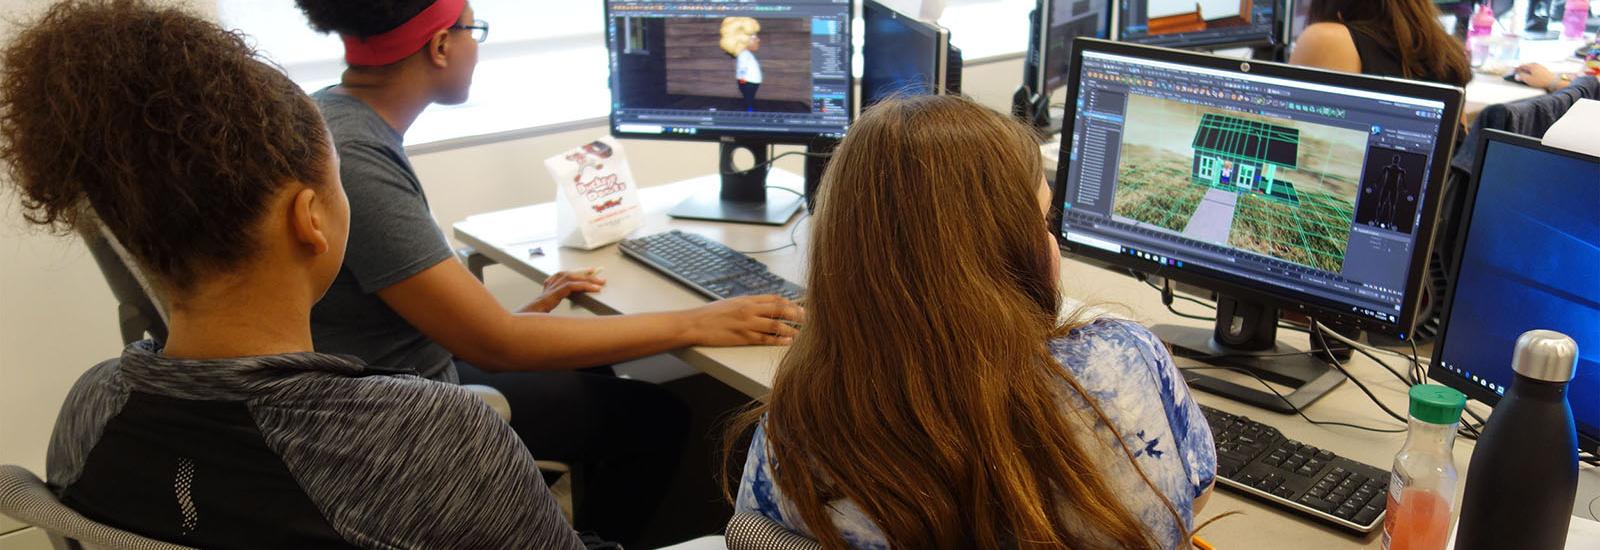 Participants of the 2019 summer mentoring program working in the computer lab